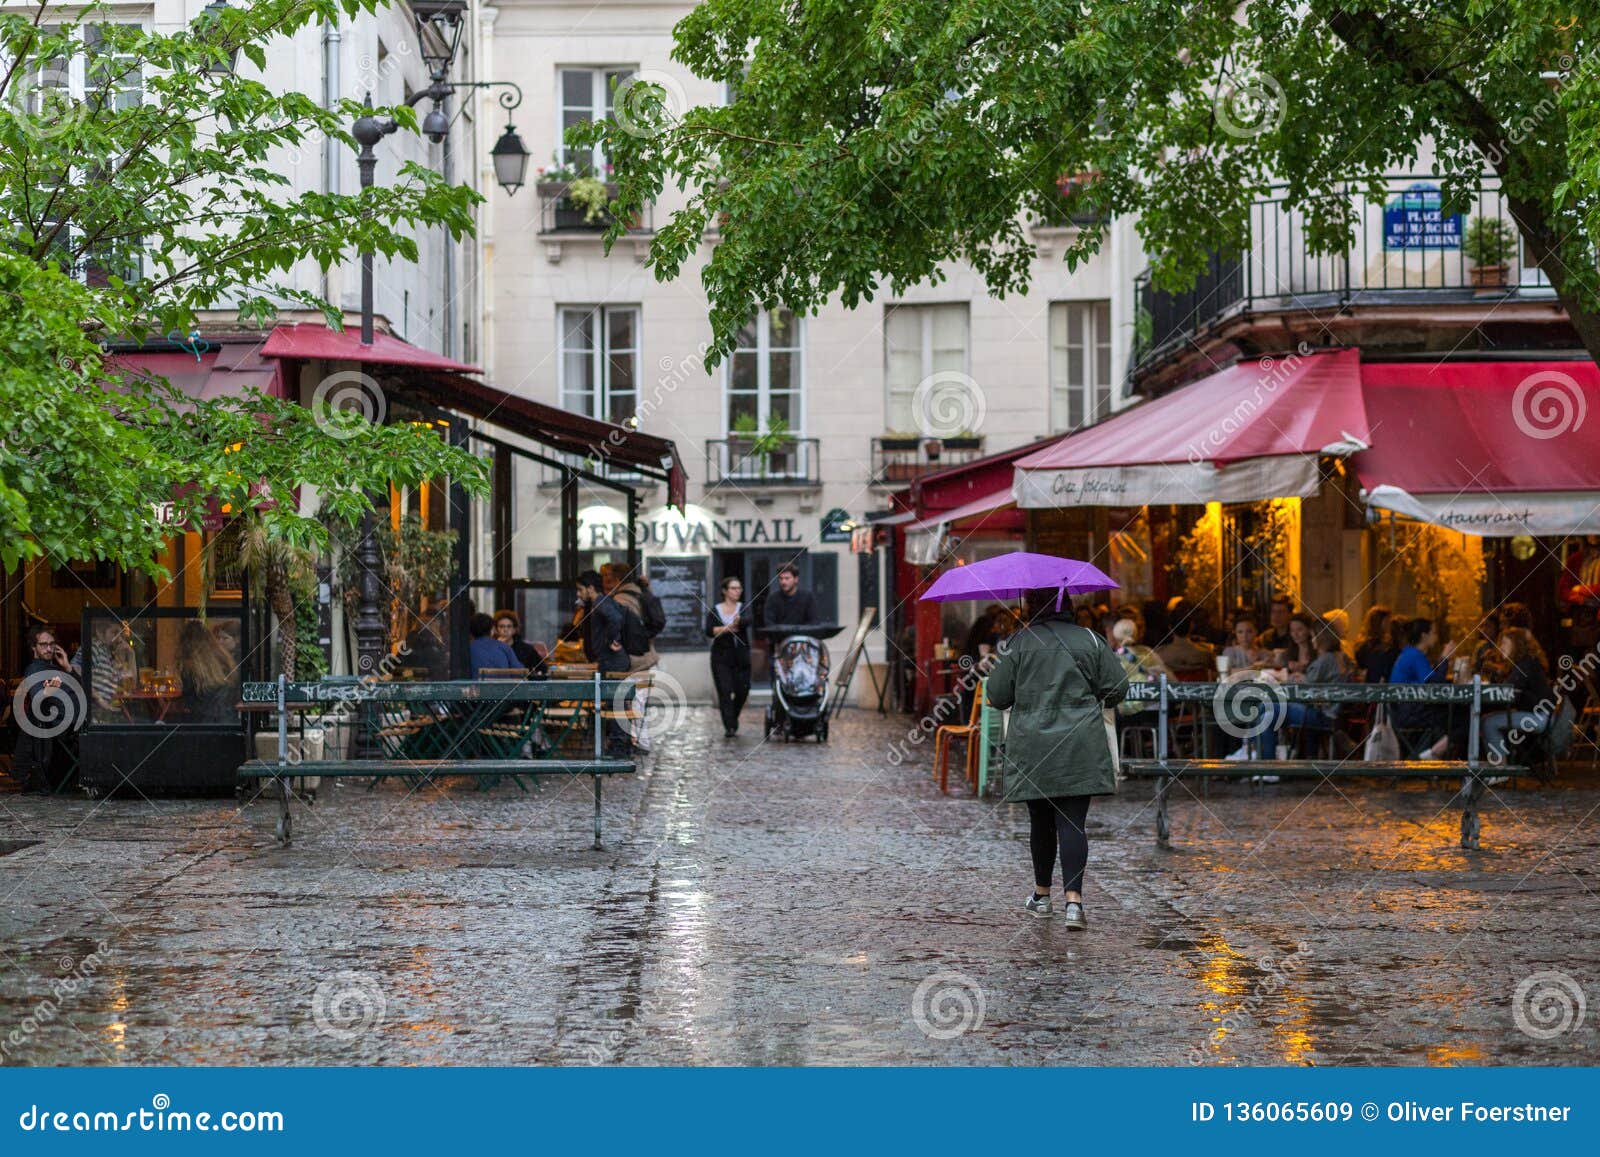 Rainy Day In The Streets Paris Editorial Stock Image Image Of Girl Autumn